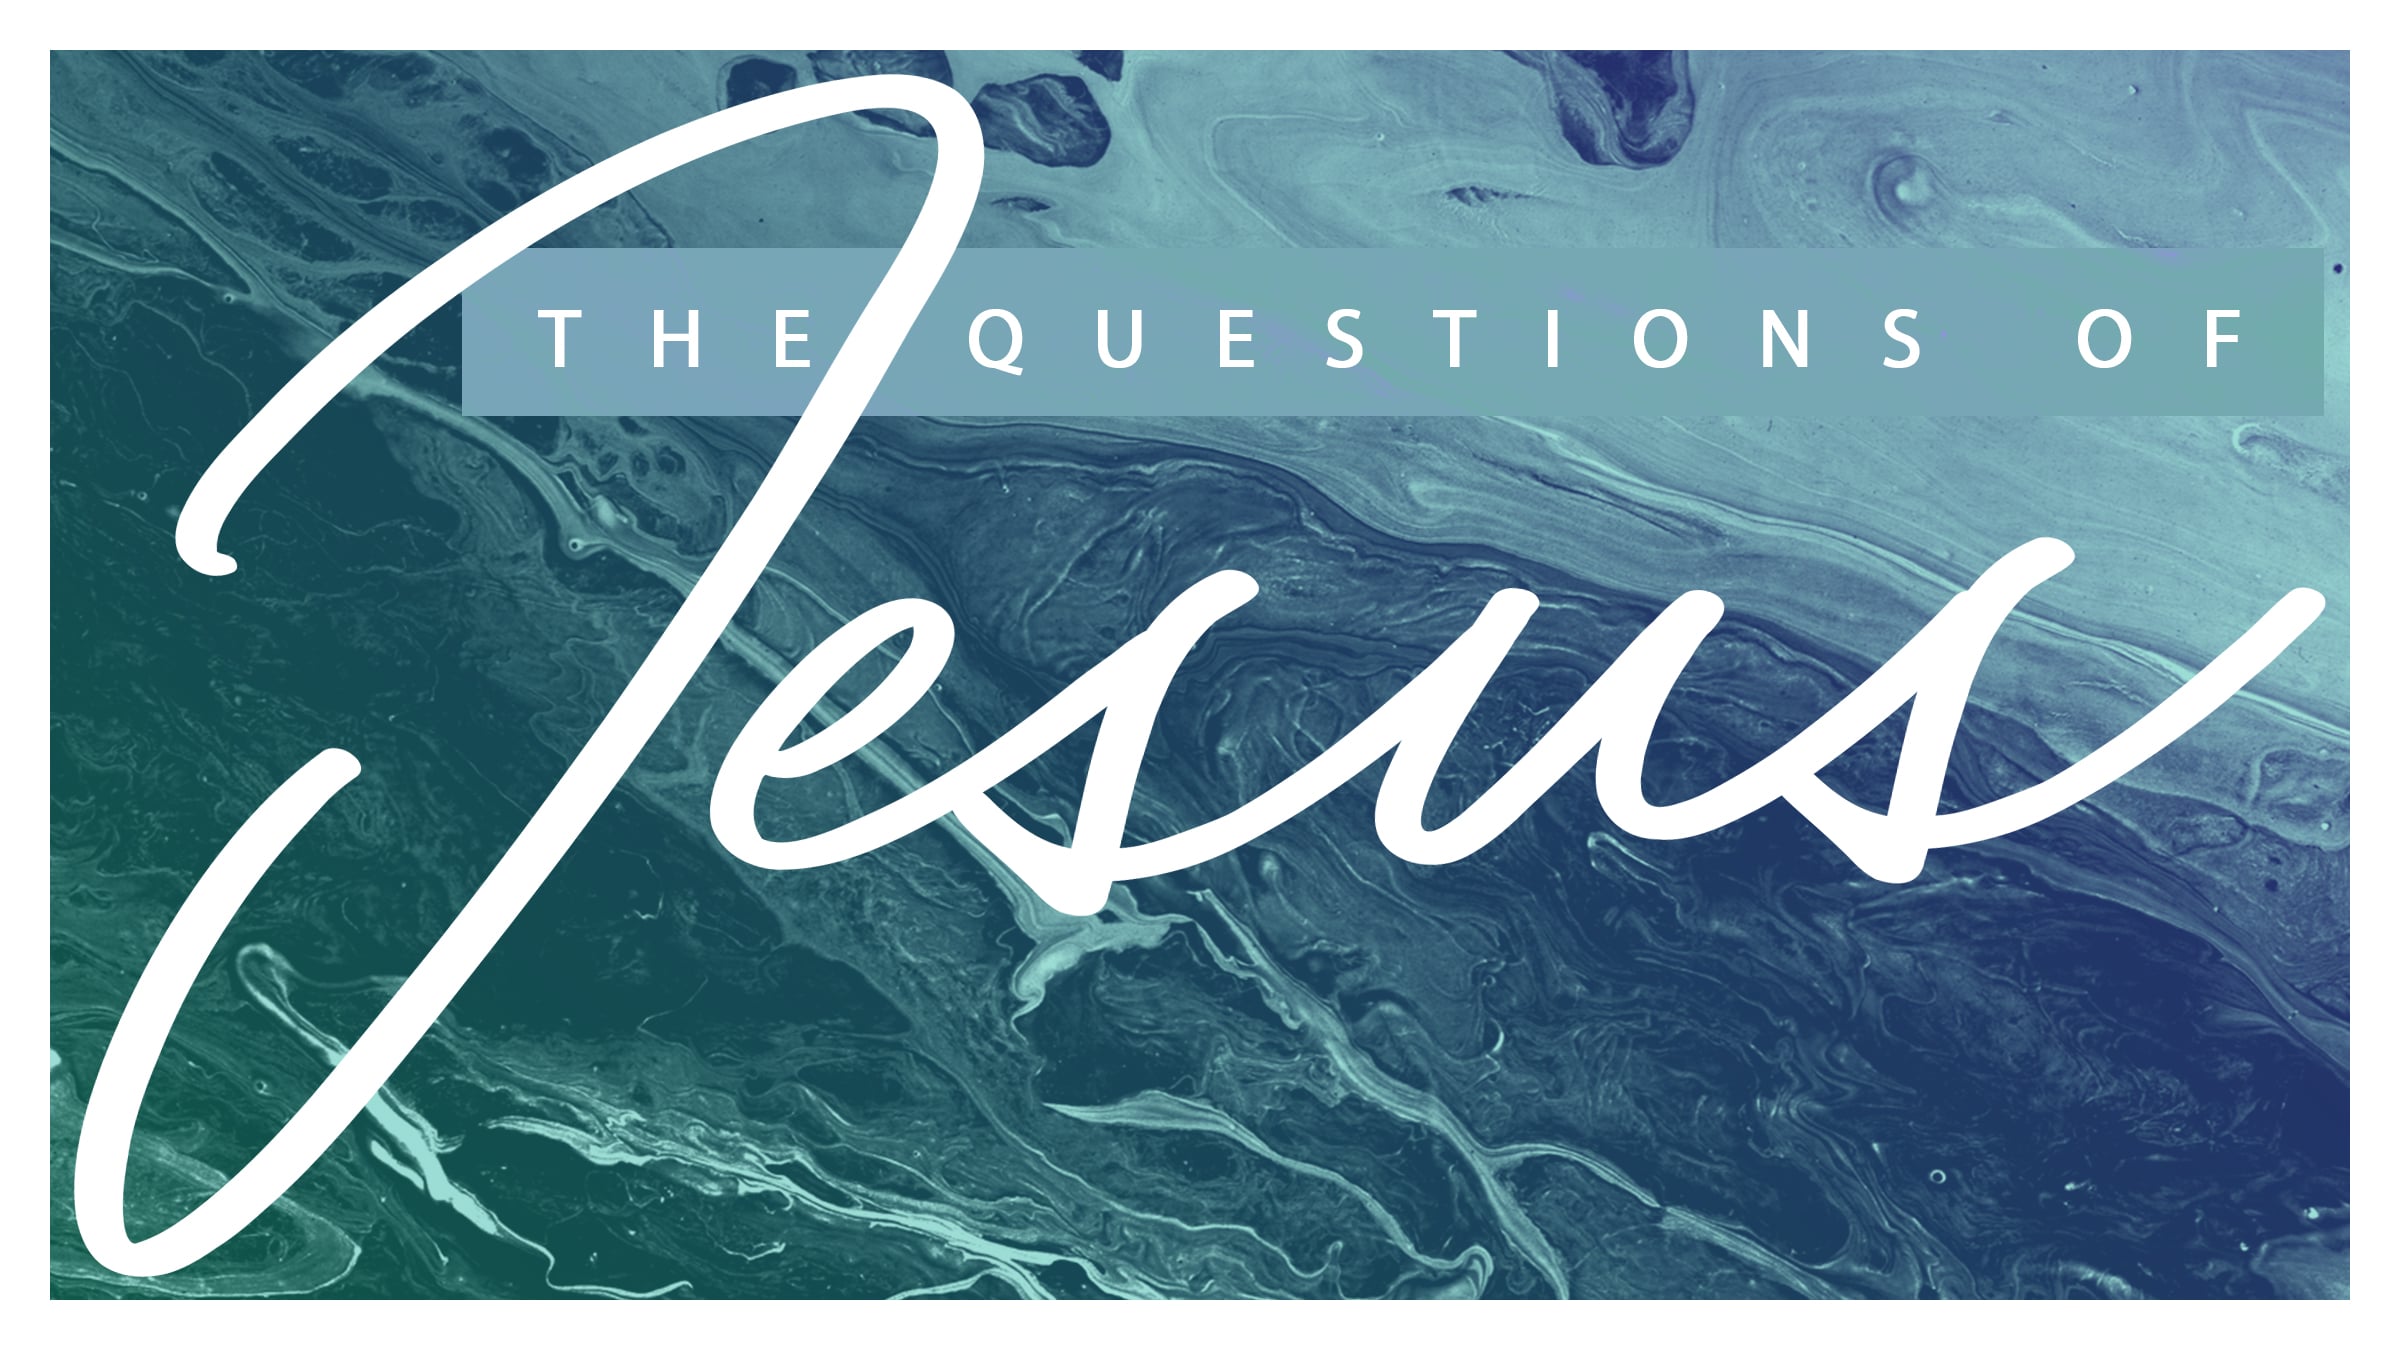 John 21:5 Are You Catching Any Fish (Questions of Jesus) Image